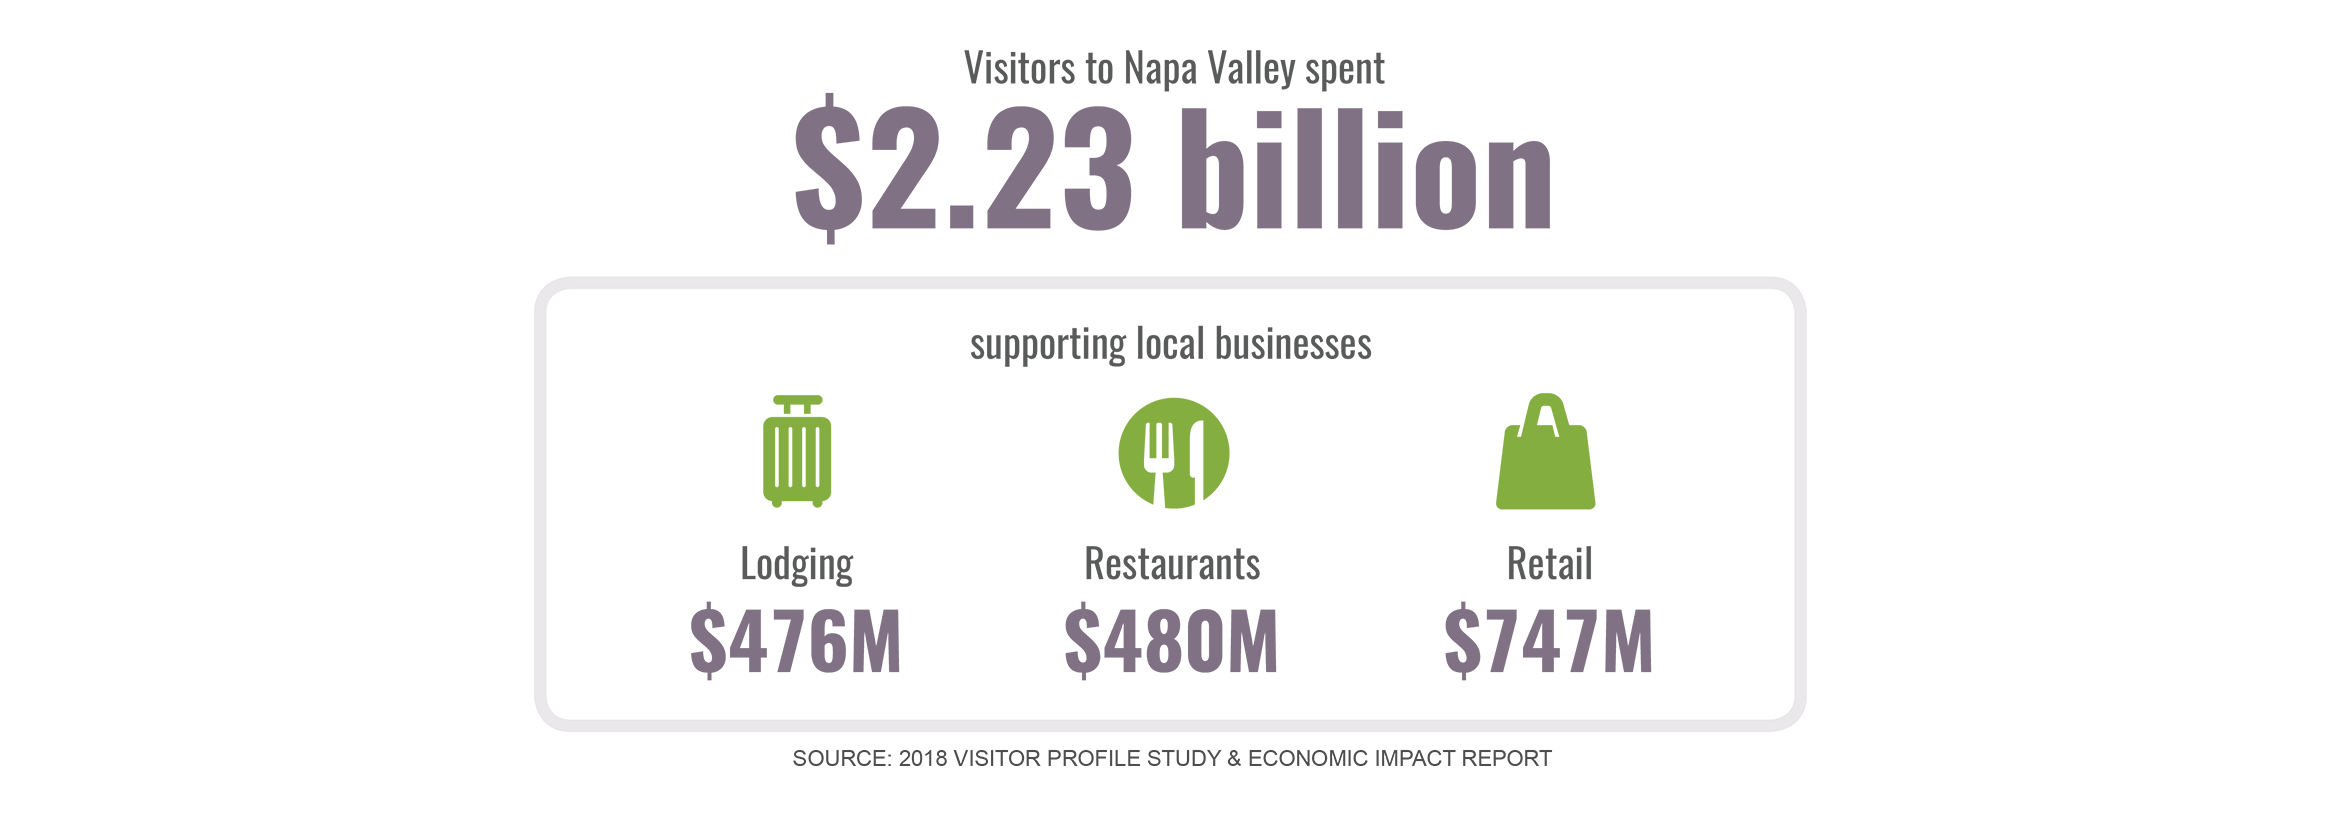 NV Visitor Spending infographic